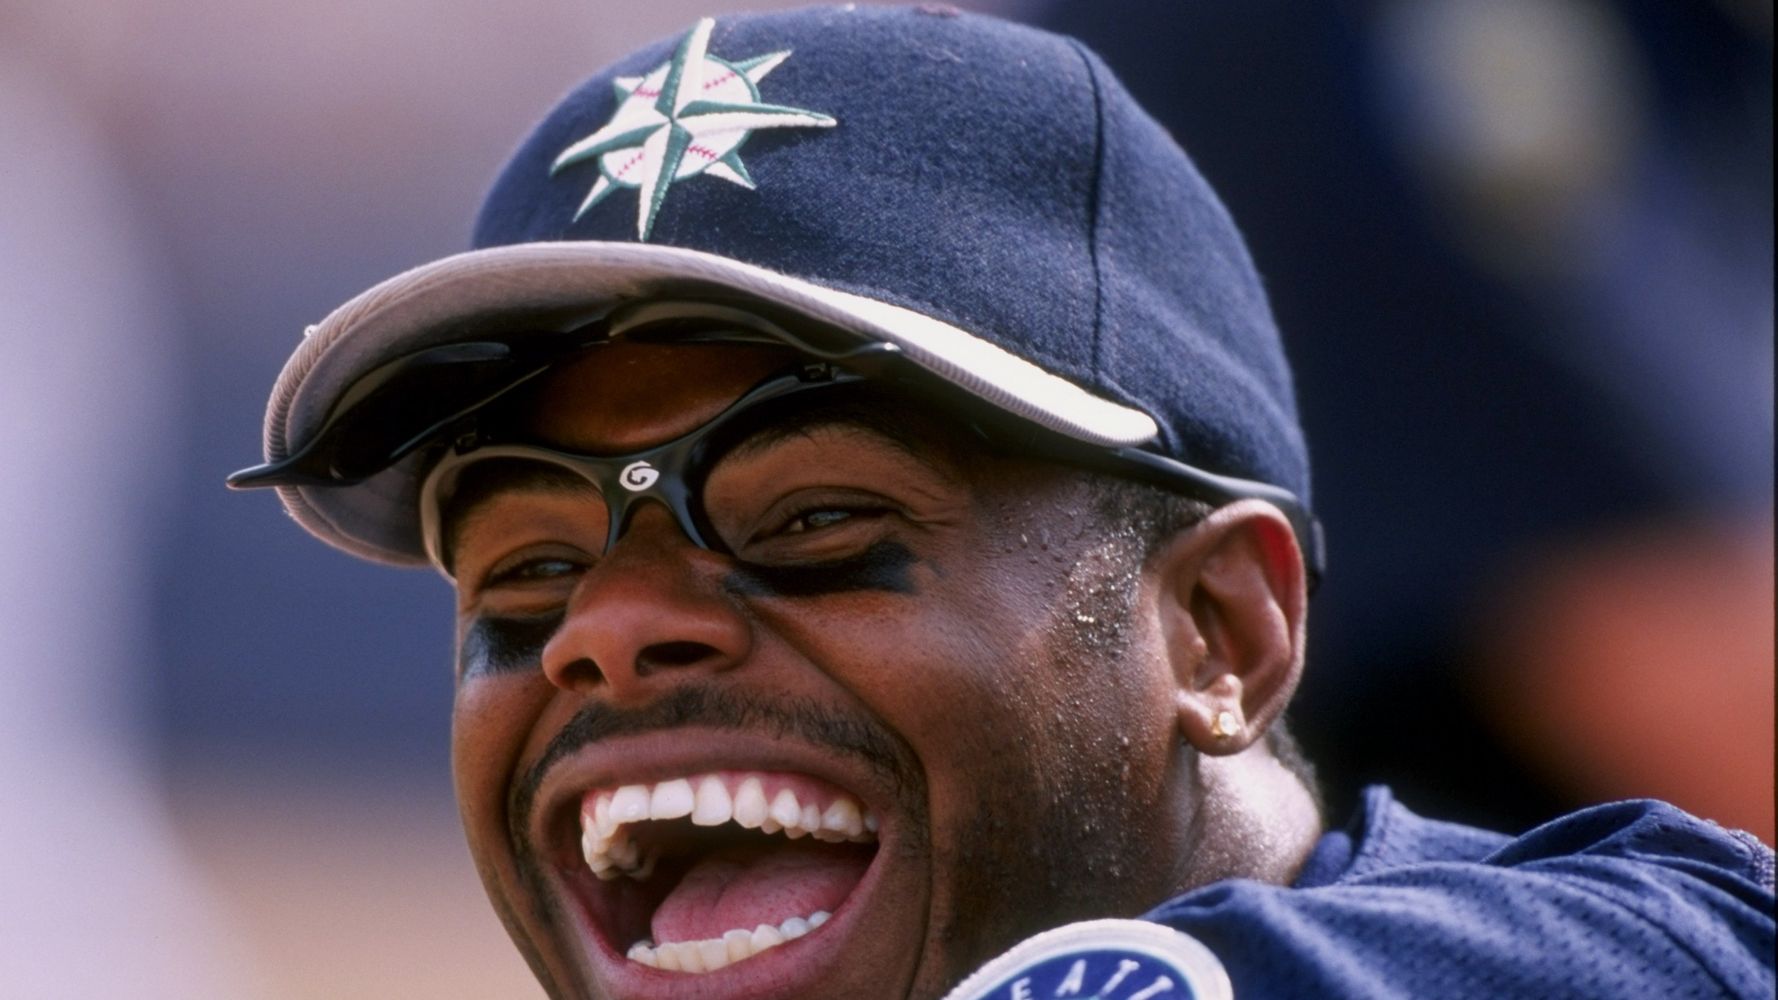 Ken Griffey Jr. was just as 'cool' then as Patrick Mahomes is now